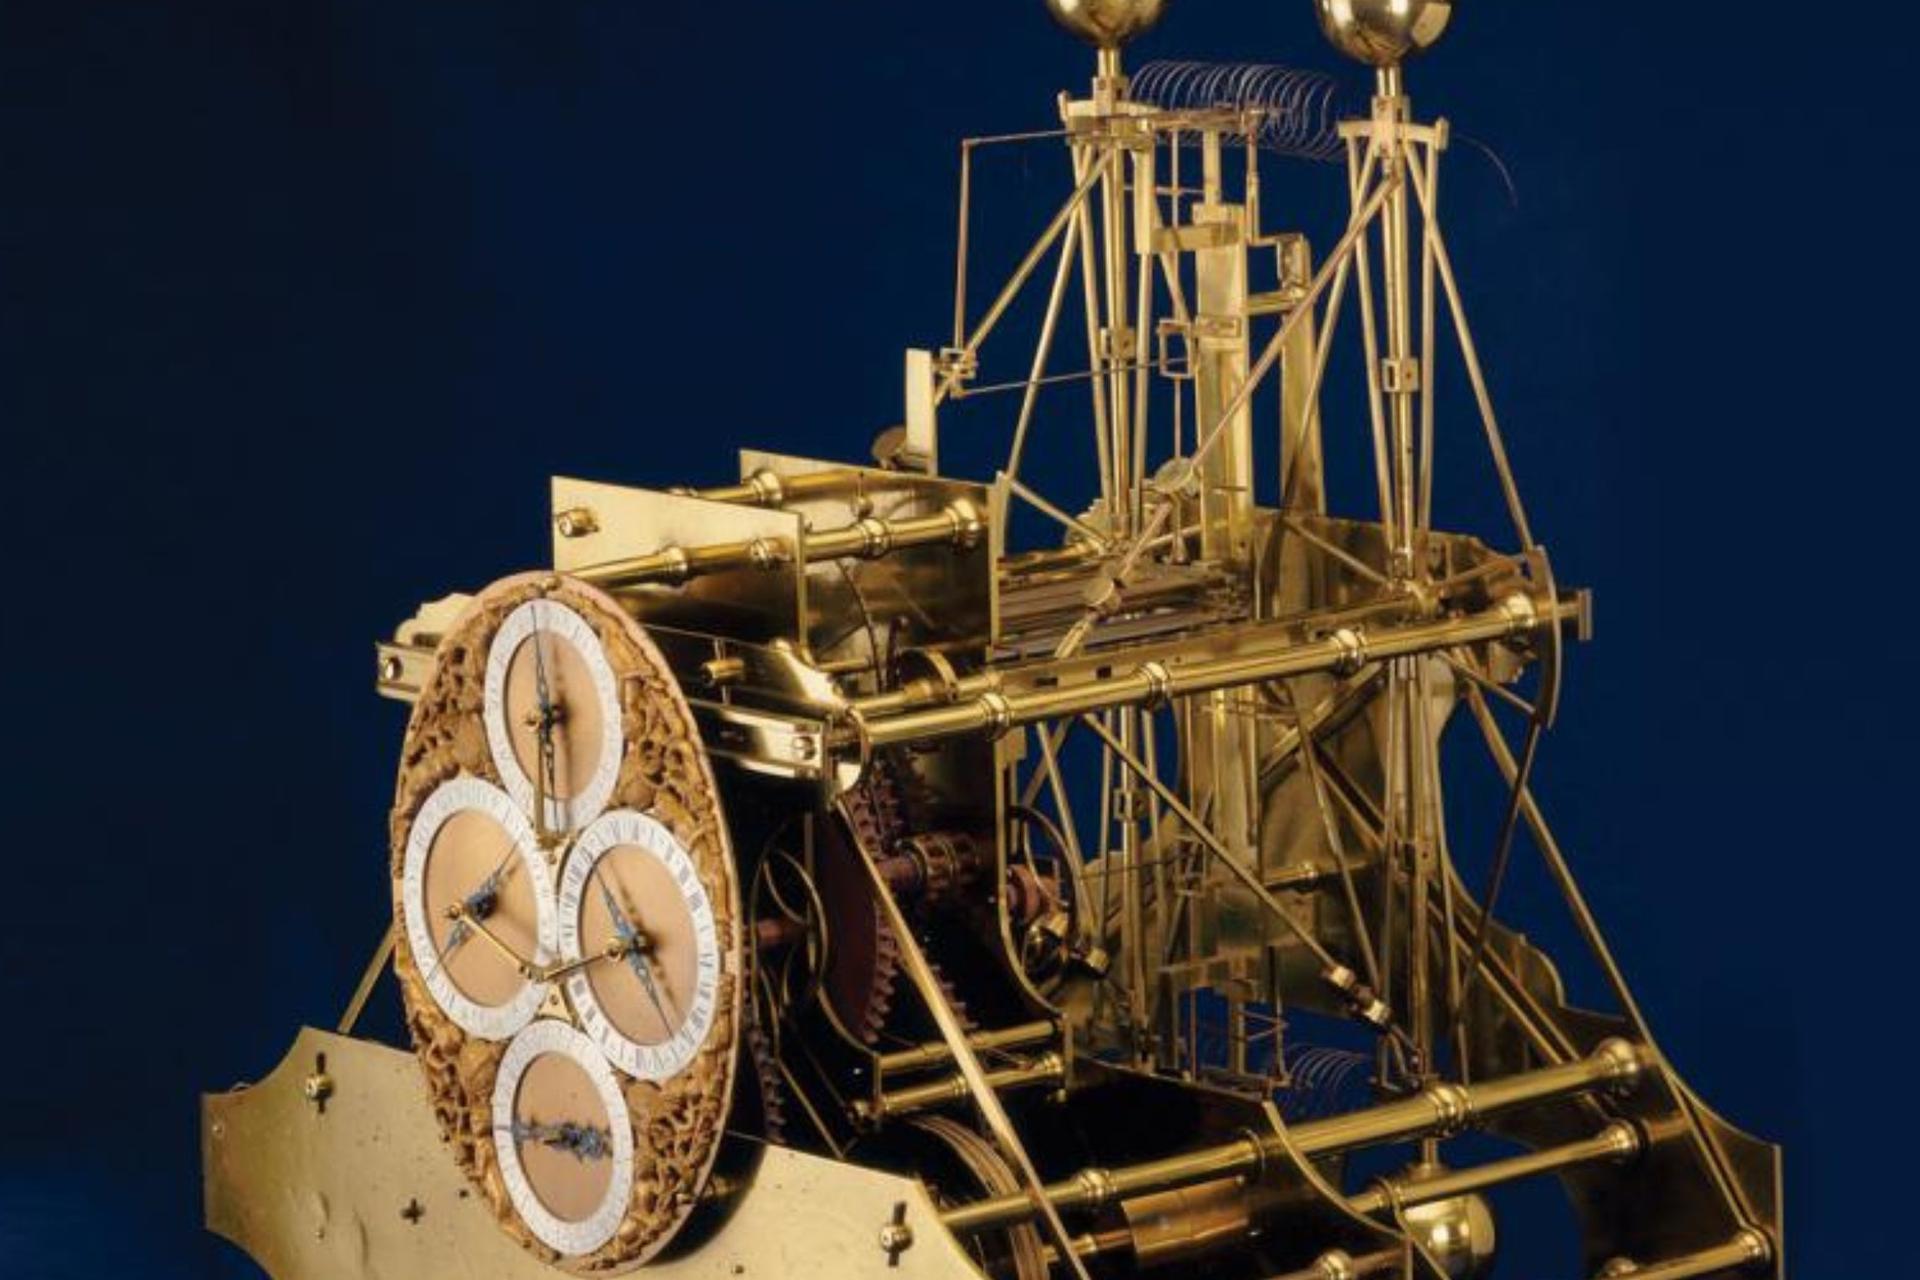 John Harrison devoted 10 years of his life to develop the first marine chronometer in 1736 Photo: Royal Museums Greenwich